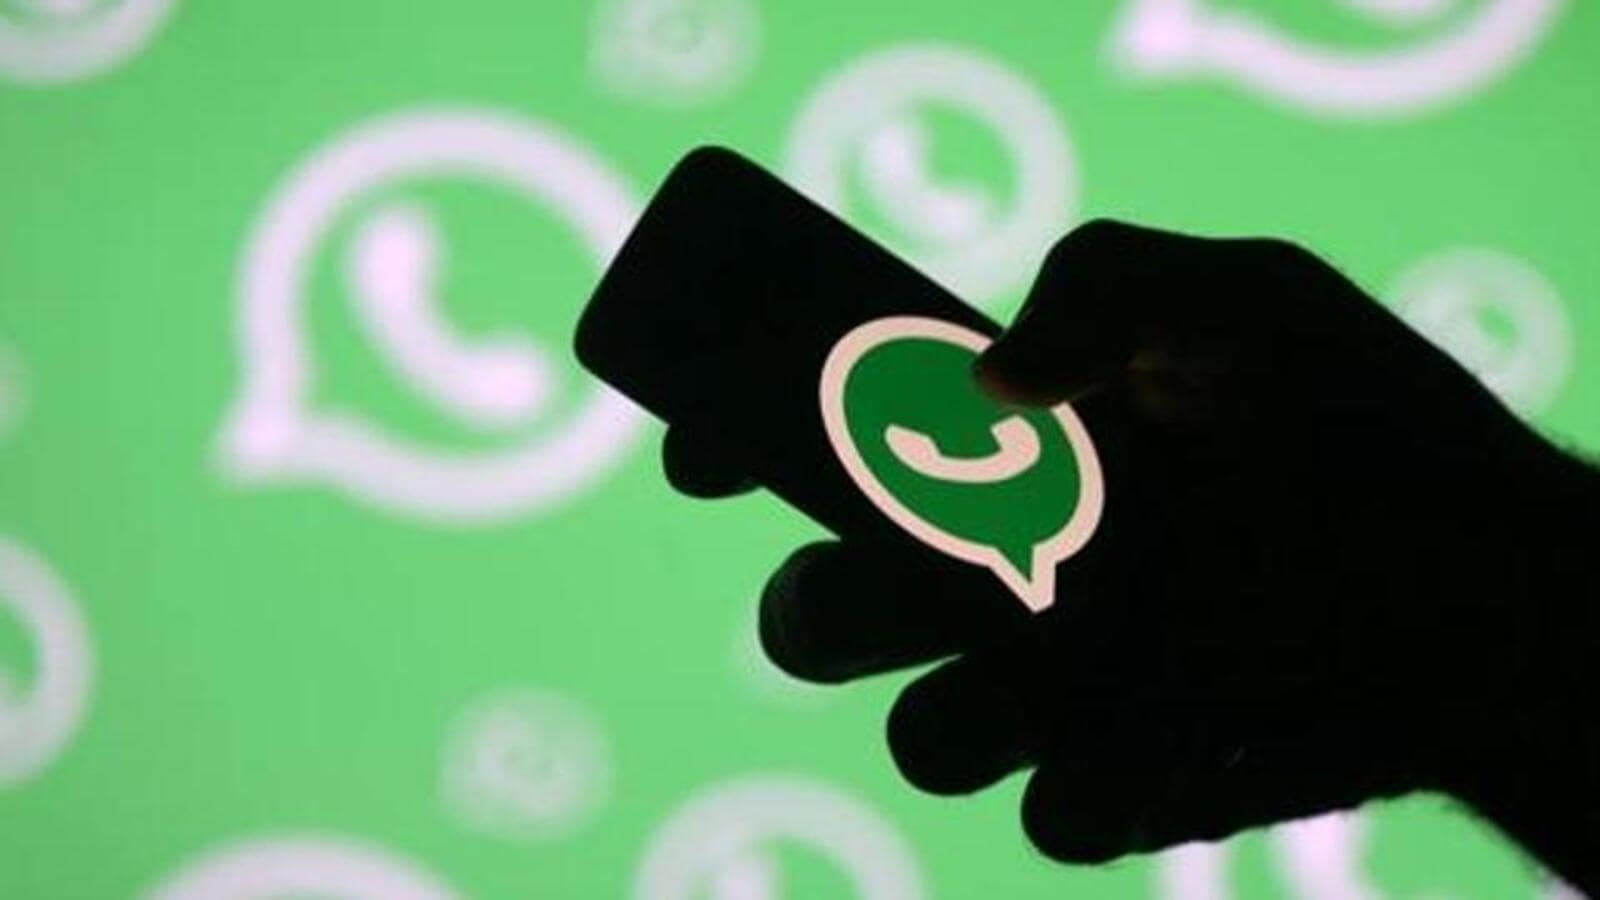 2.3 million Indian accounts banned in August, says WhatsApp report | Latest  News India - Hindustan Times